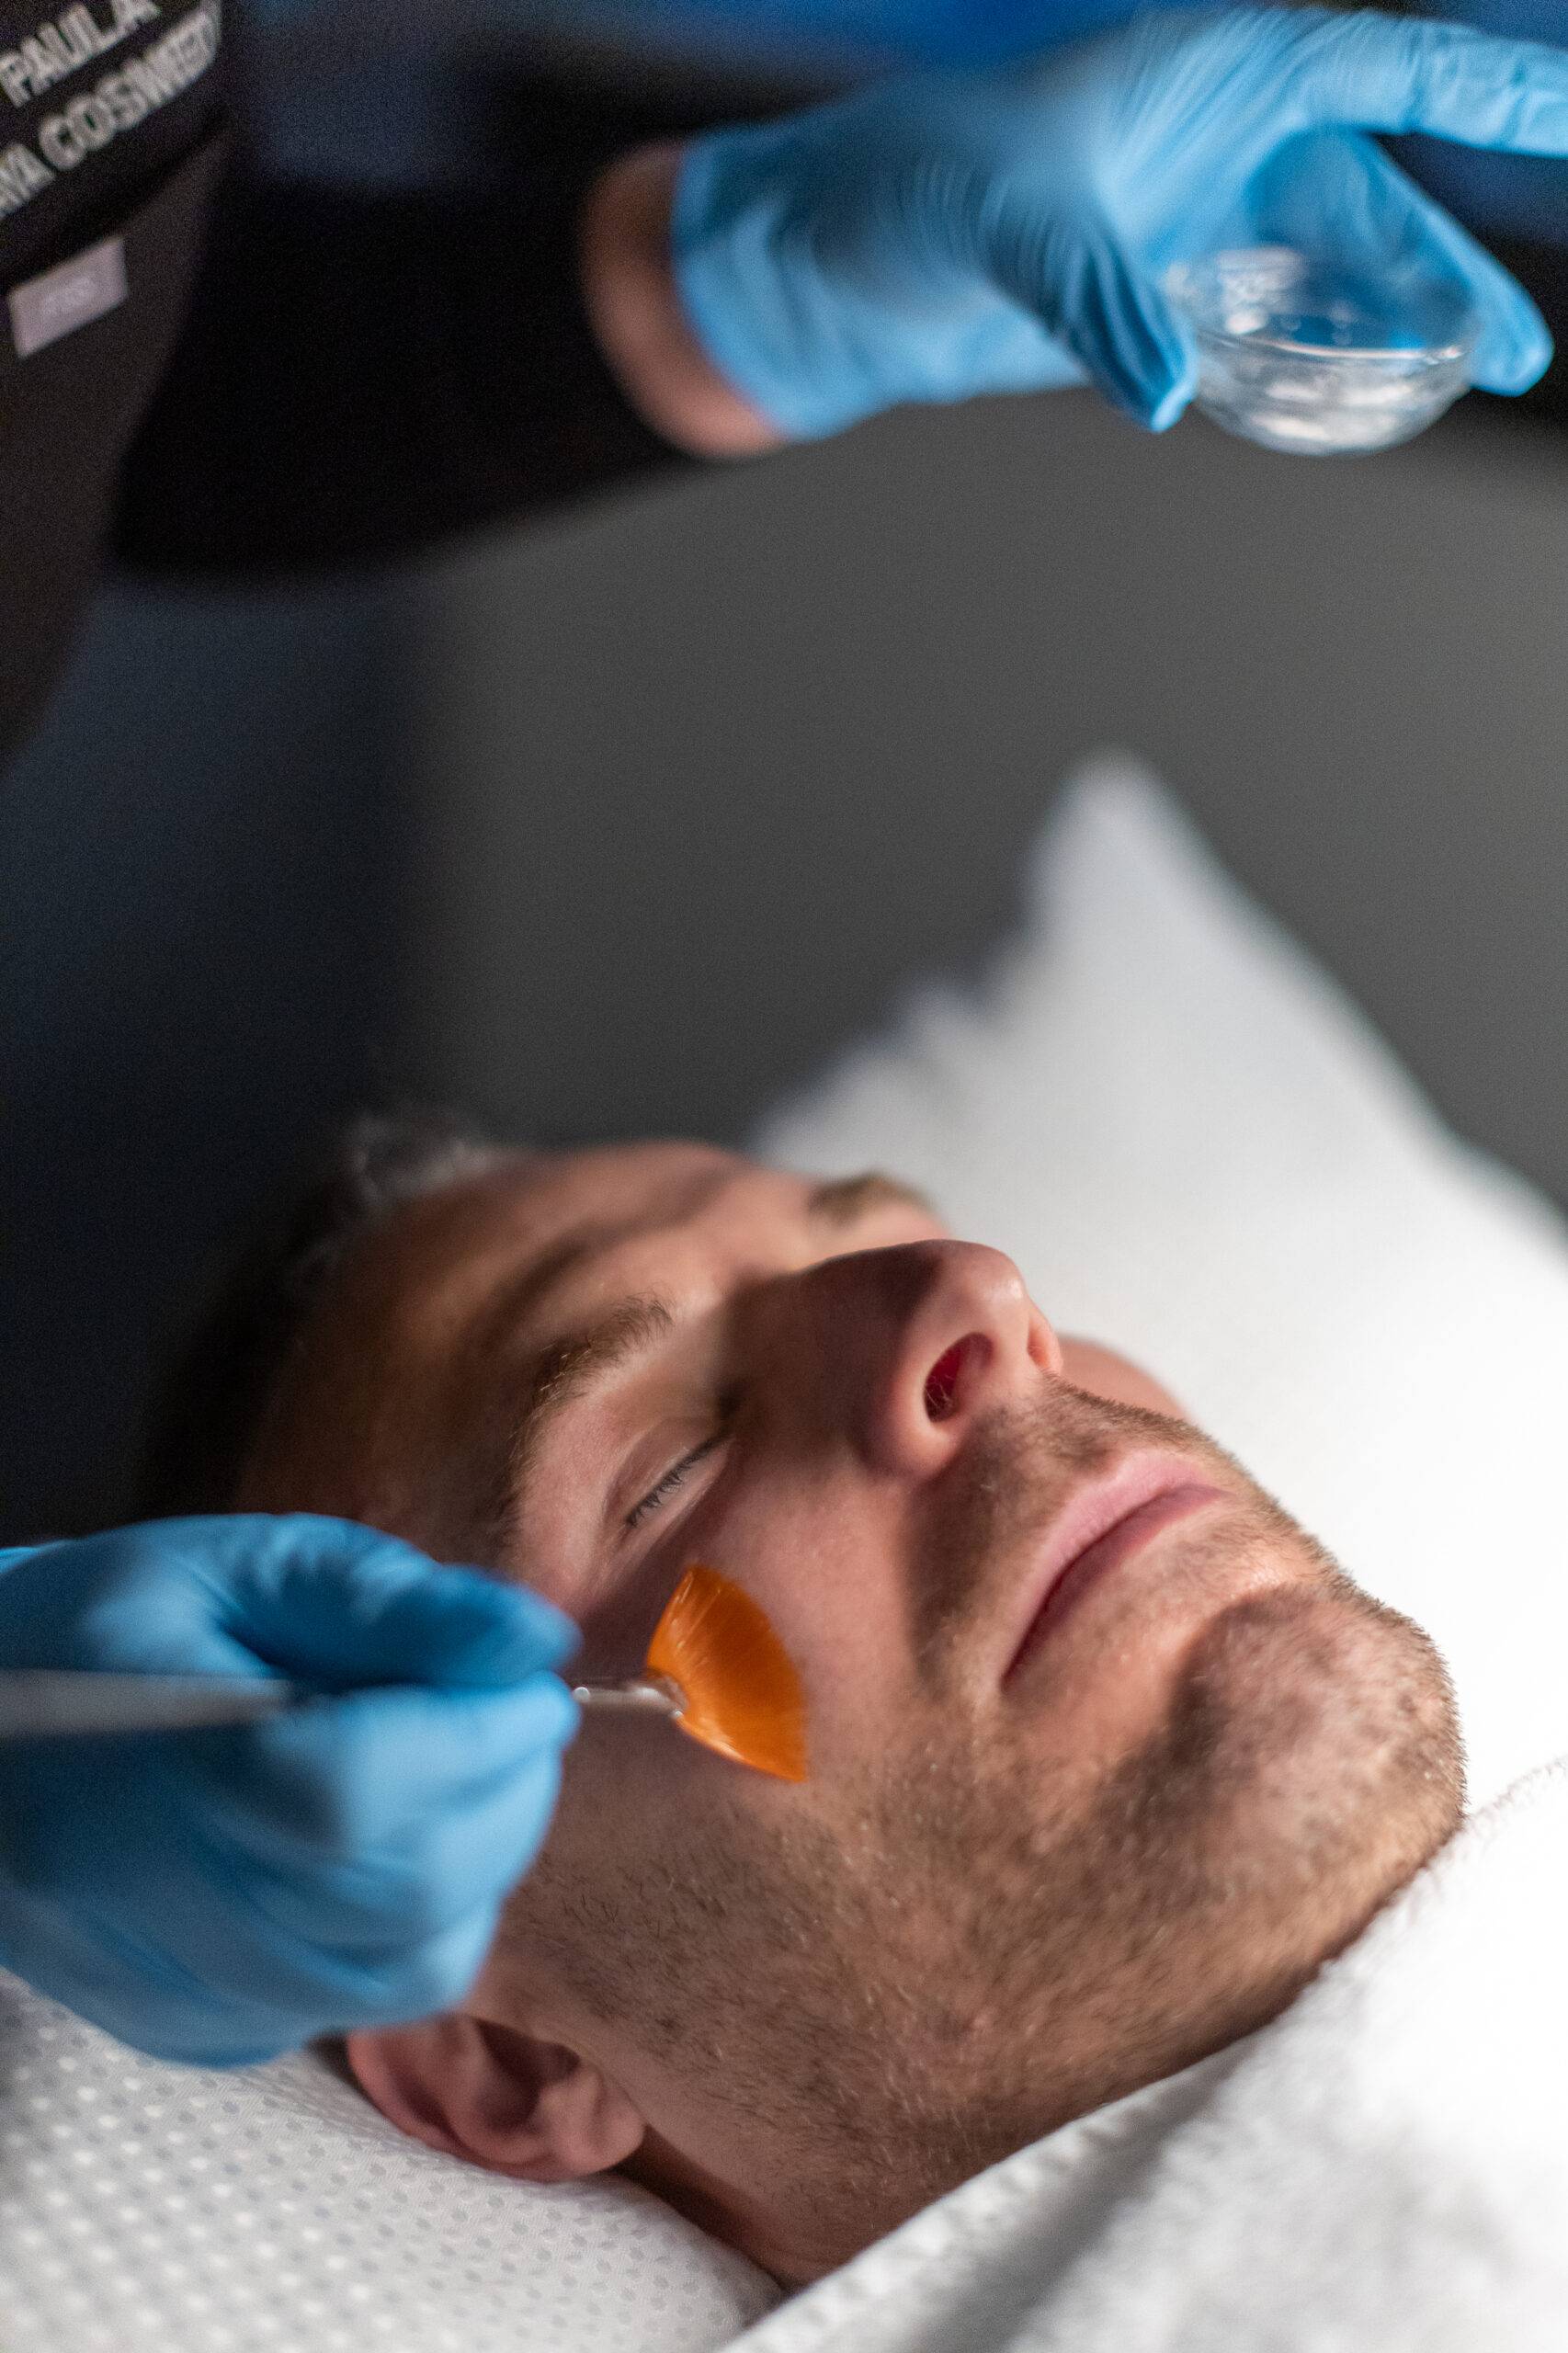 A man lying on a treatment bed receiving an acne treatment with a gel mask, while a professional in blue gloves carefully applies a solution to his face.